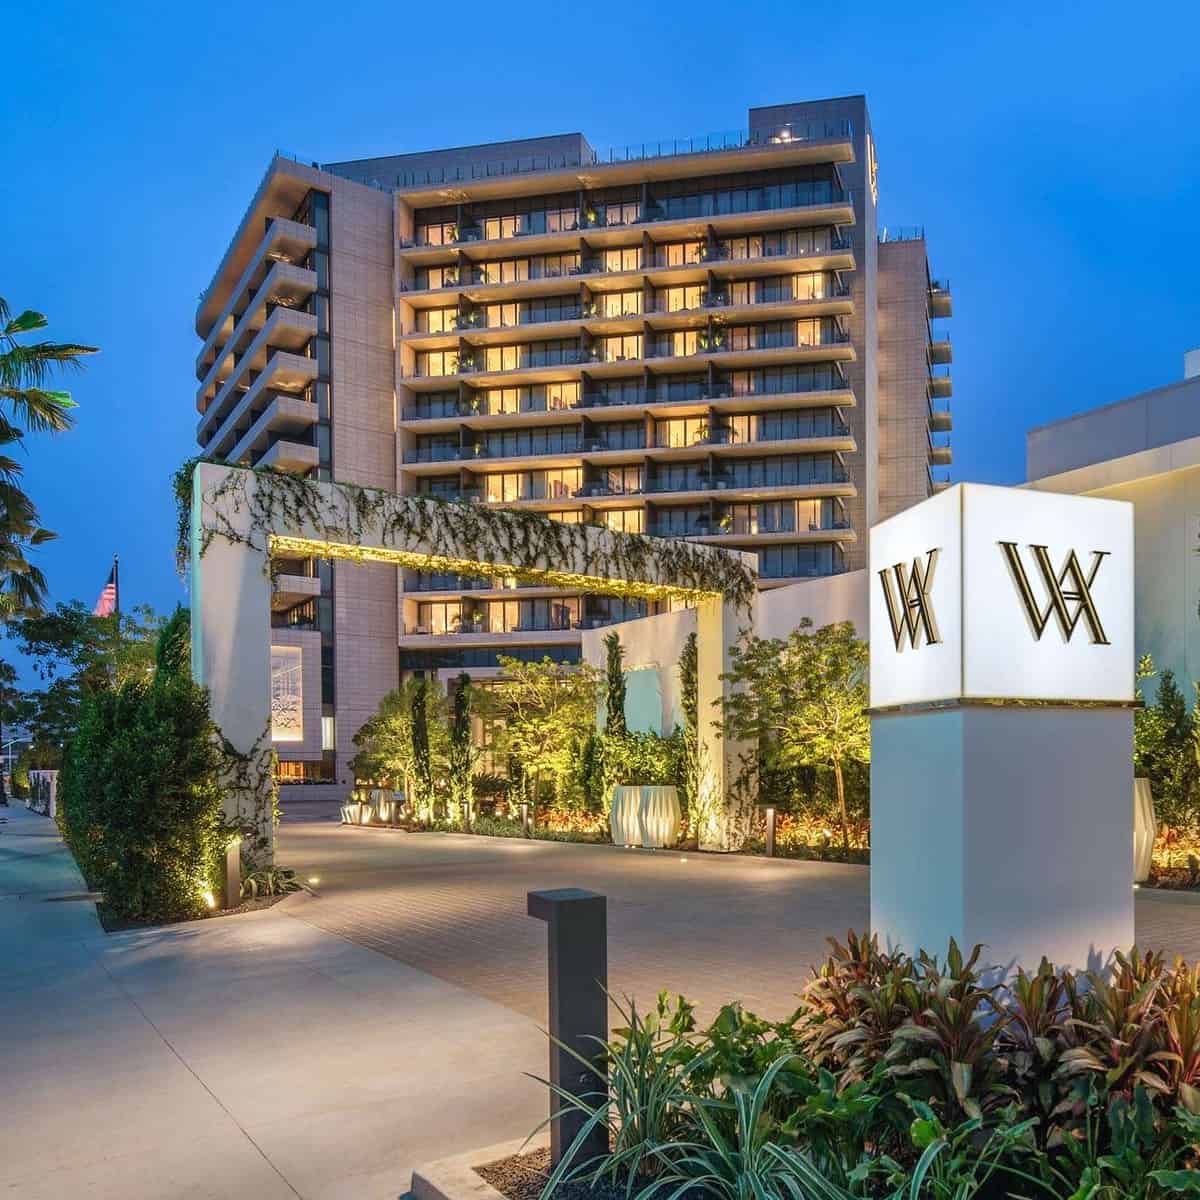 Waldorf Astoria Beverly Hills offers a combination of true luxury for discerning travelers: an urban respite centered in the heart of Beverly Hills.